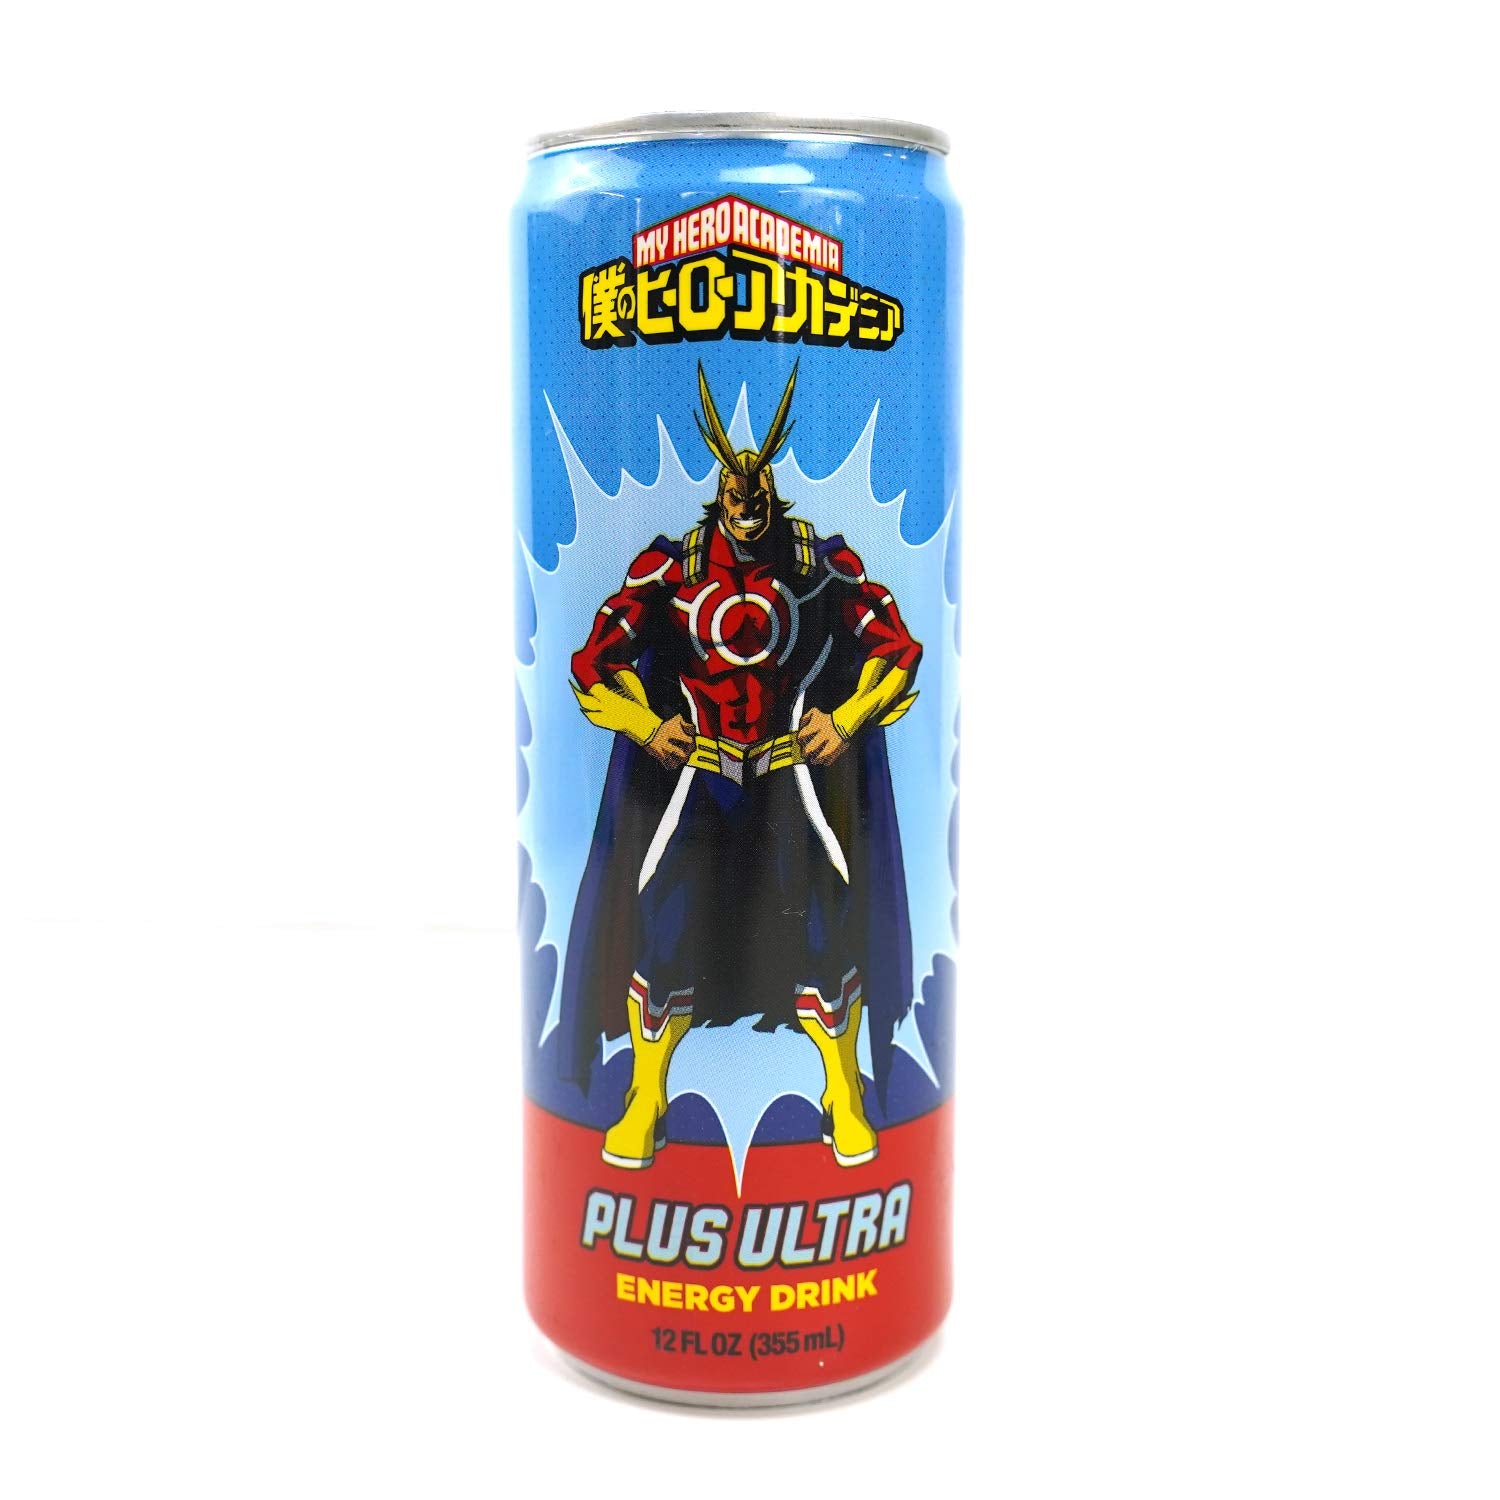 My Hero Academia All Might Plus Ultra Energy Drink (2 Pack) 12 FL OZ (355mL) Can With 2 GosuToys Stickers